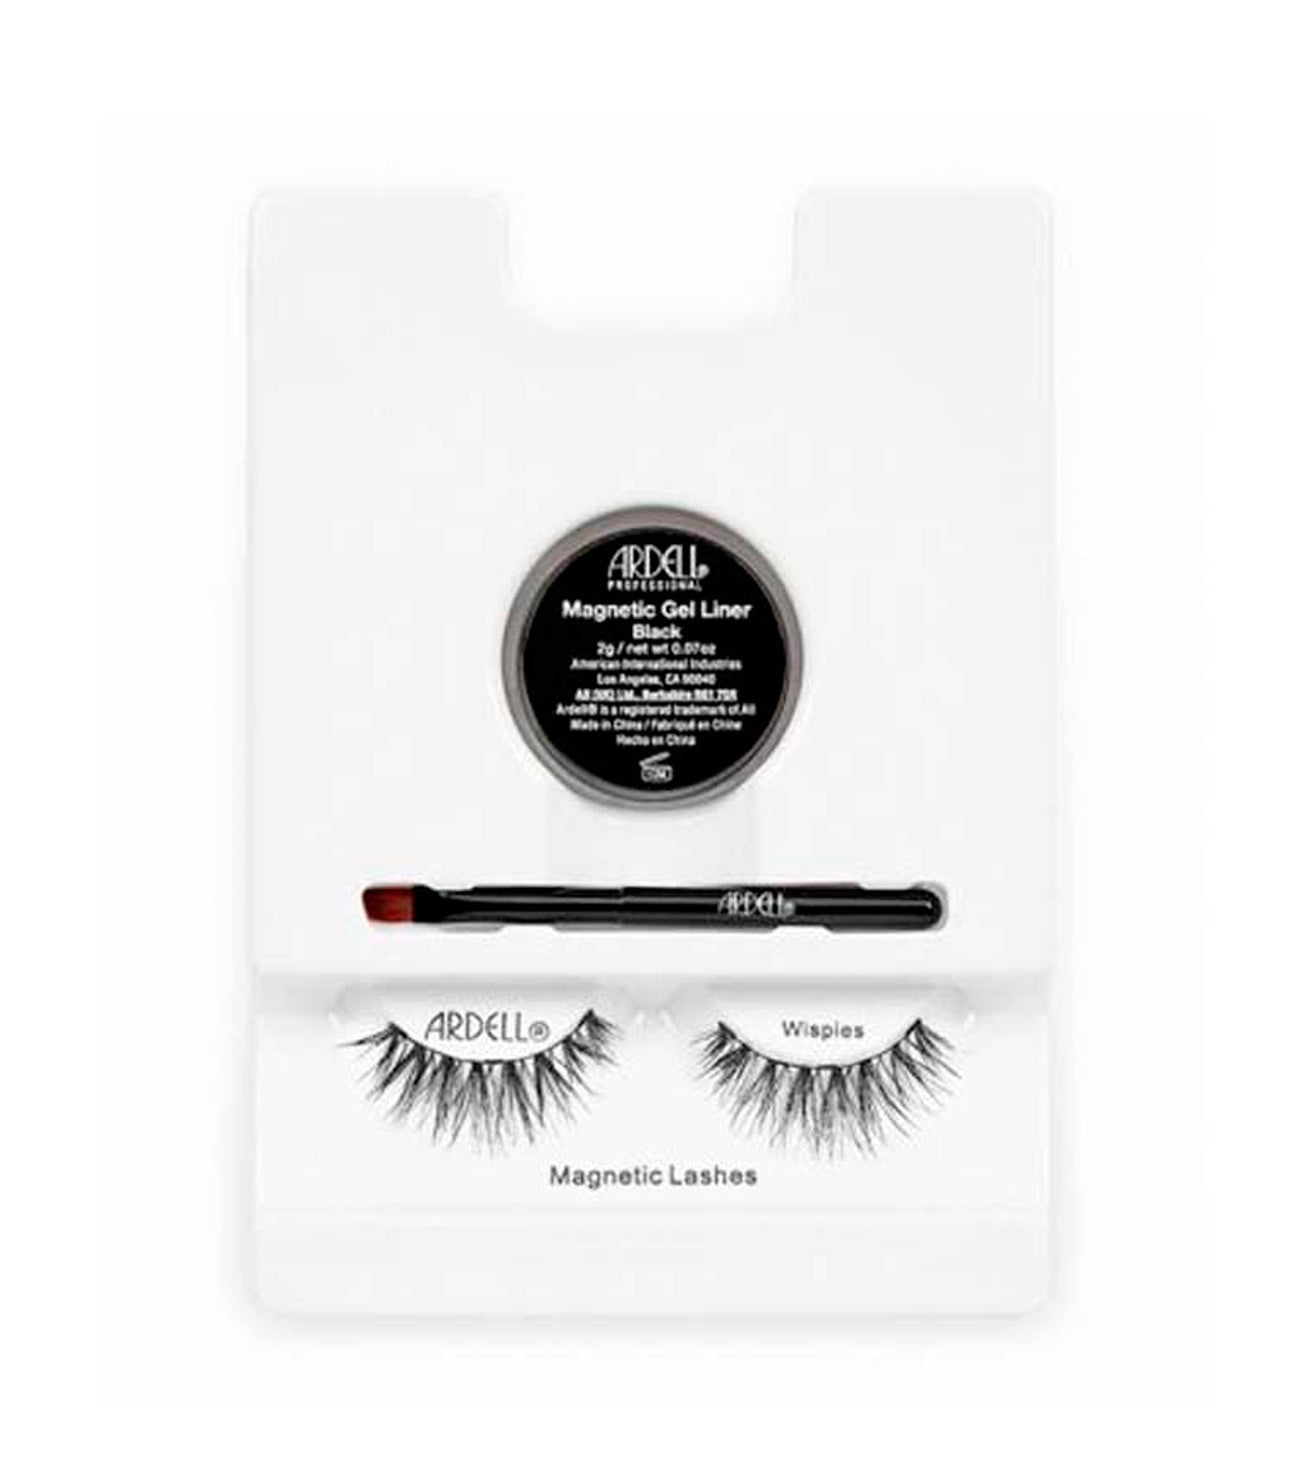 MAGNETIC LINER AND LASH WISPIES - 36850